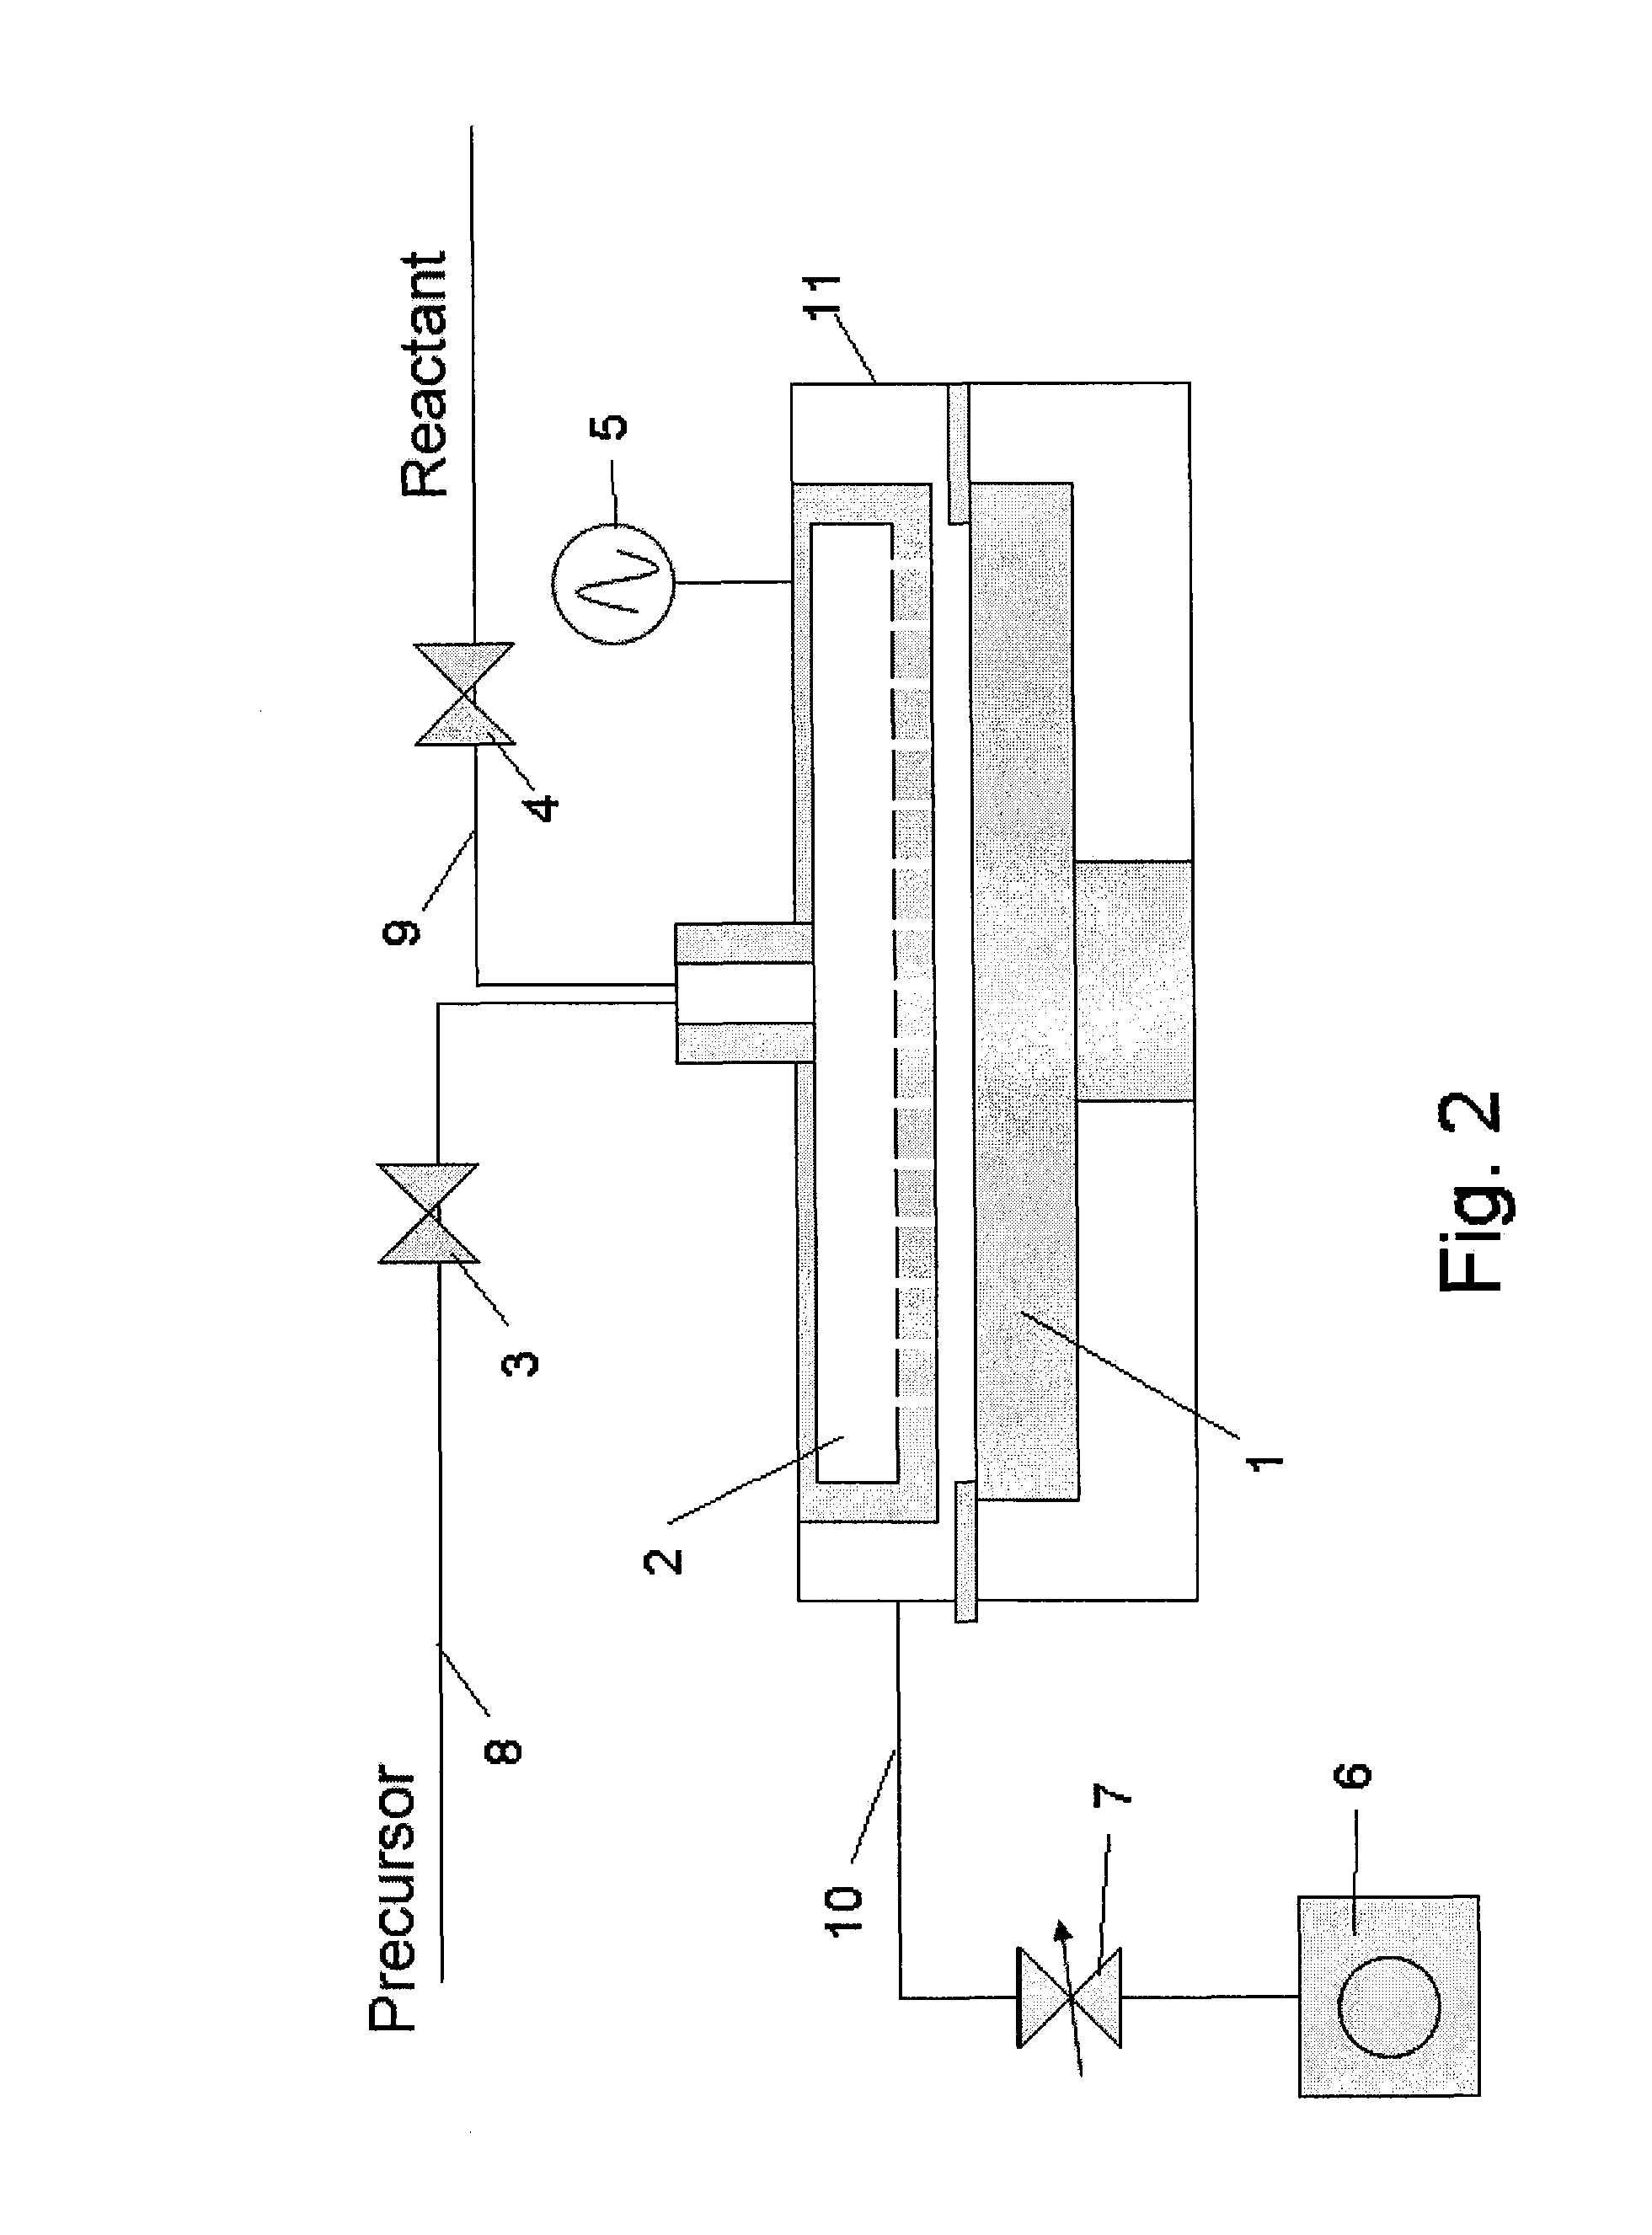 Method of Forming Insulation Film by Modified PEALD